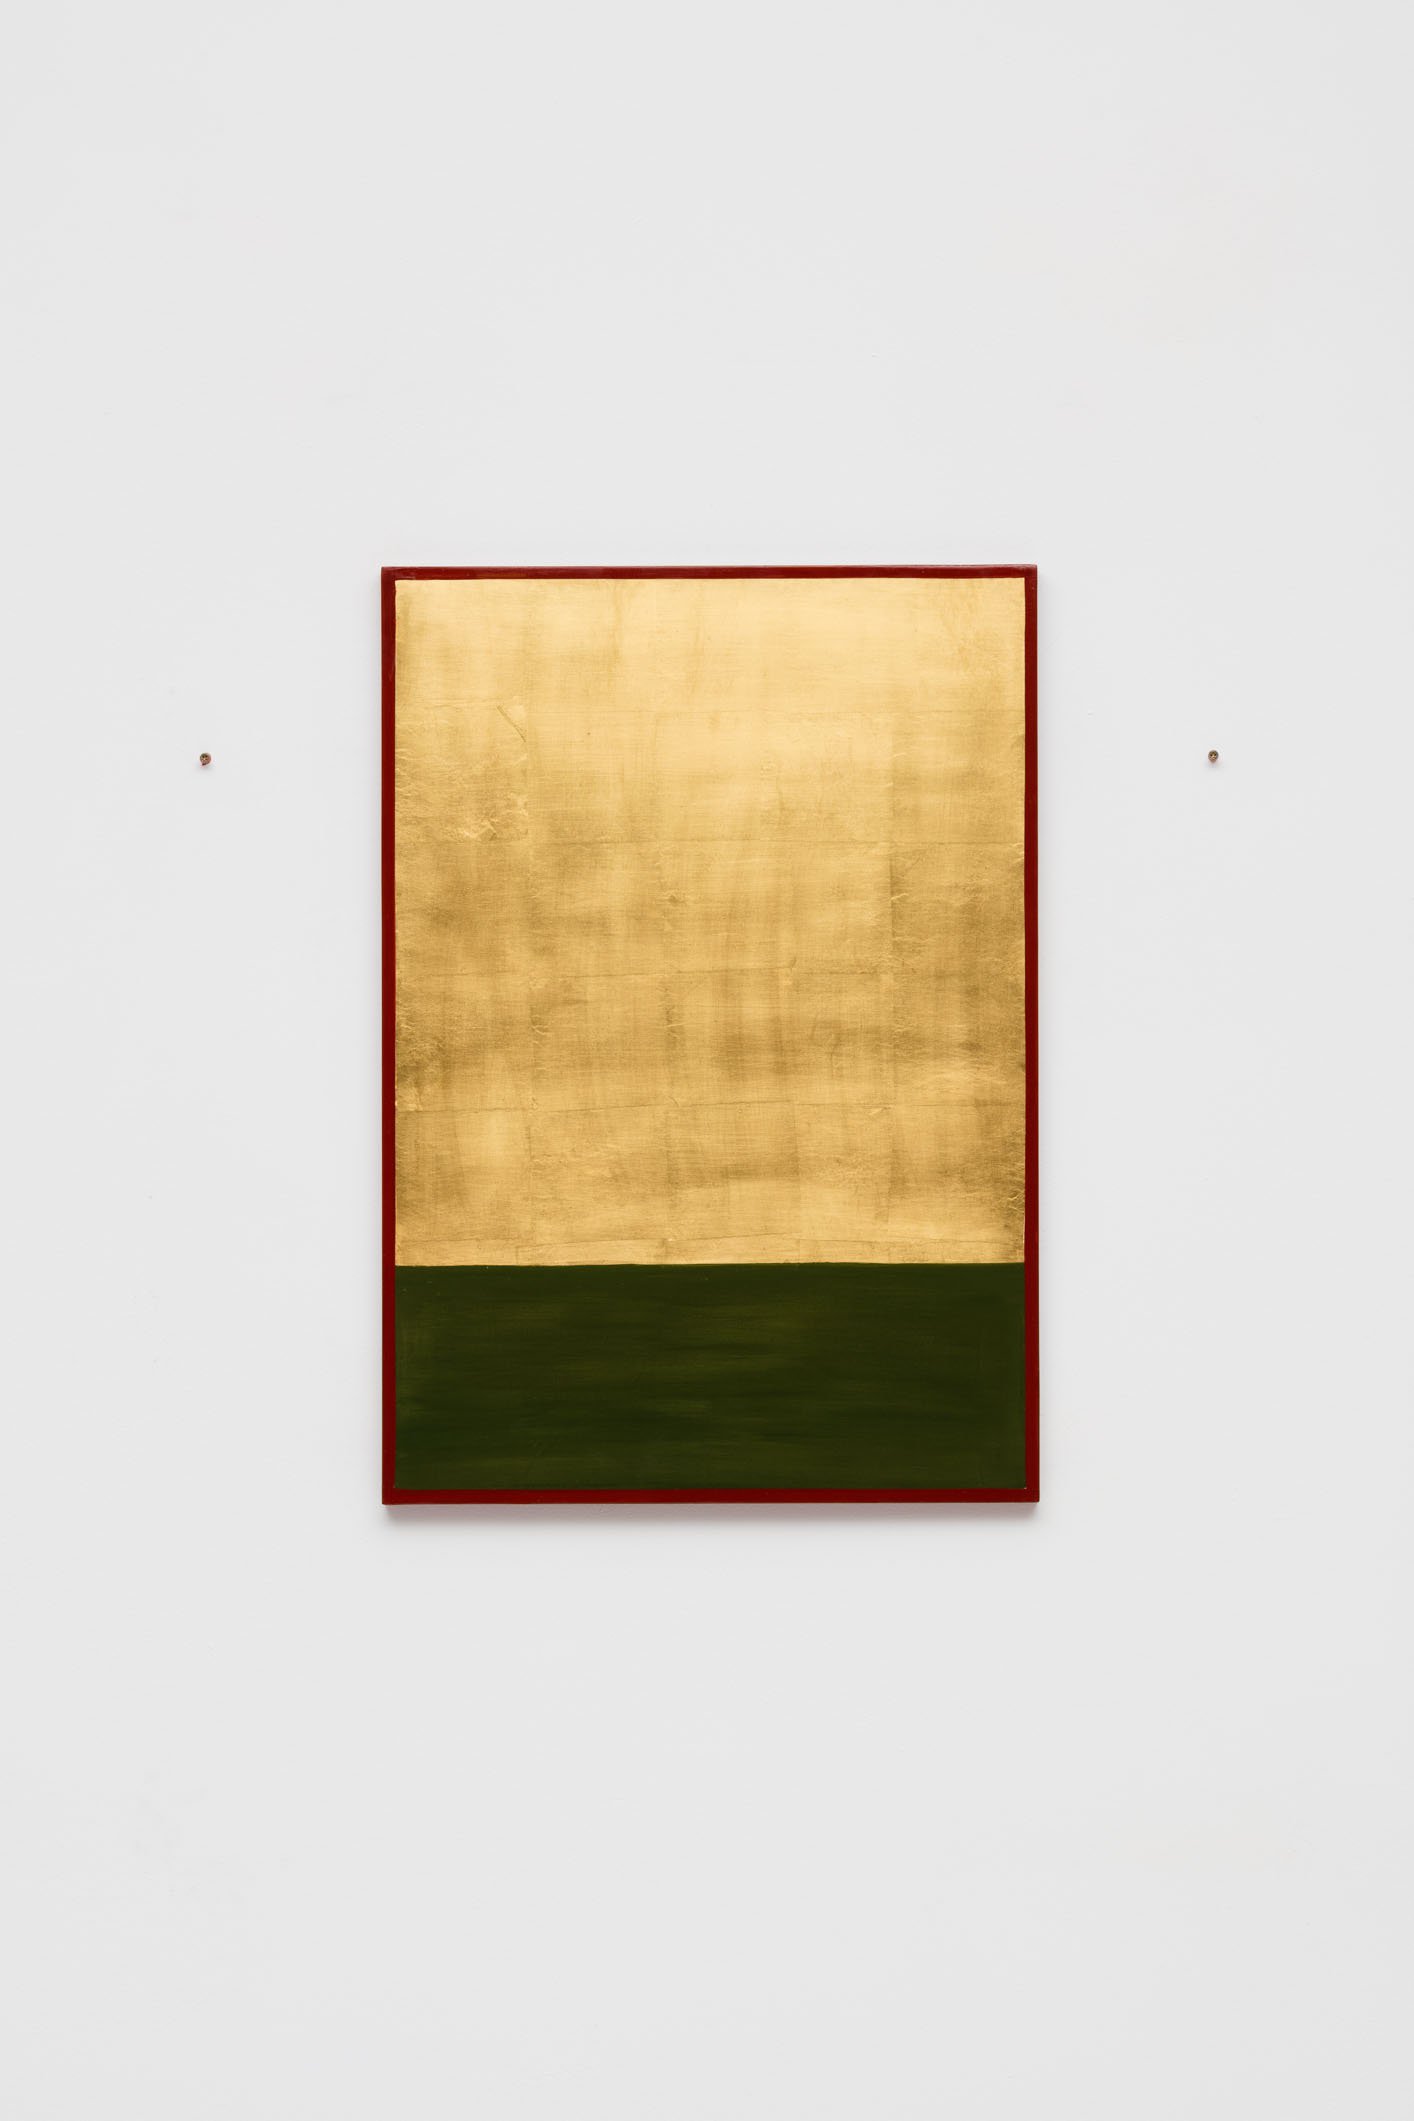 Christodoulos Panayiotou, Untitled, wood, paint, gold leaf, 70 x 49 cm (27 1/2 x 19 1/4 in), 2016